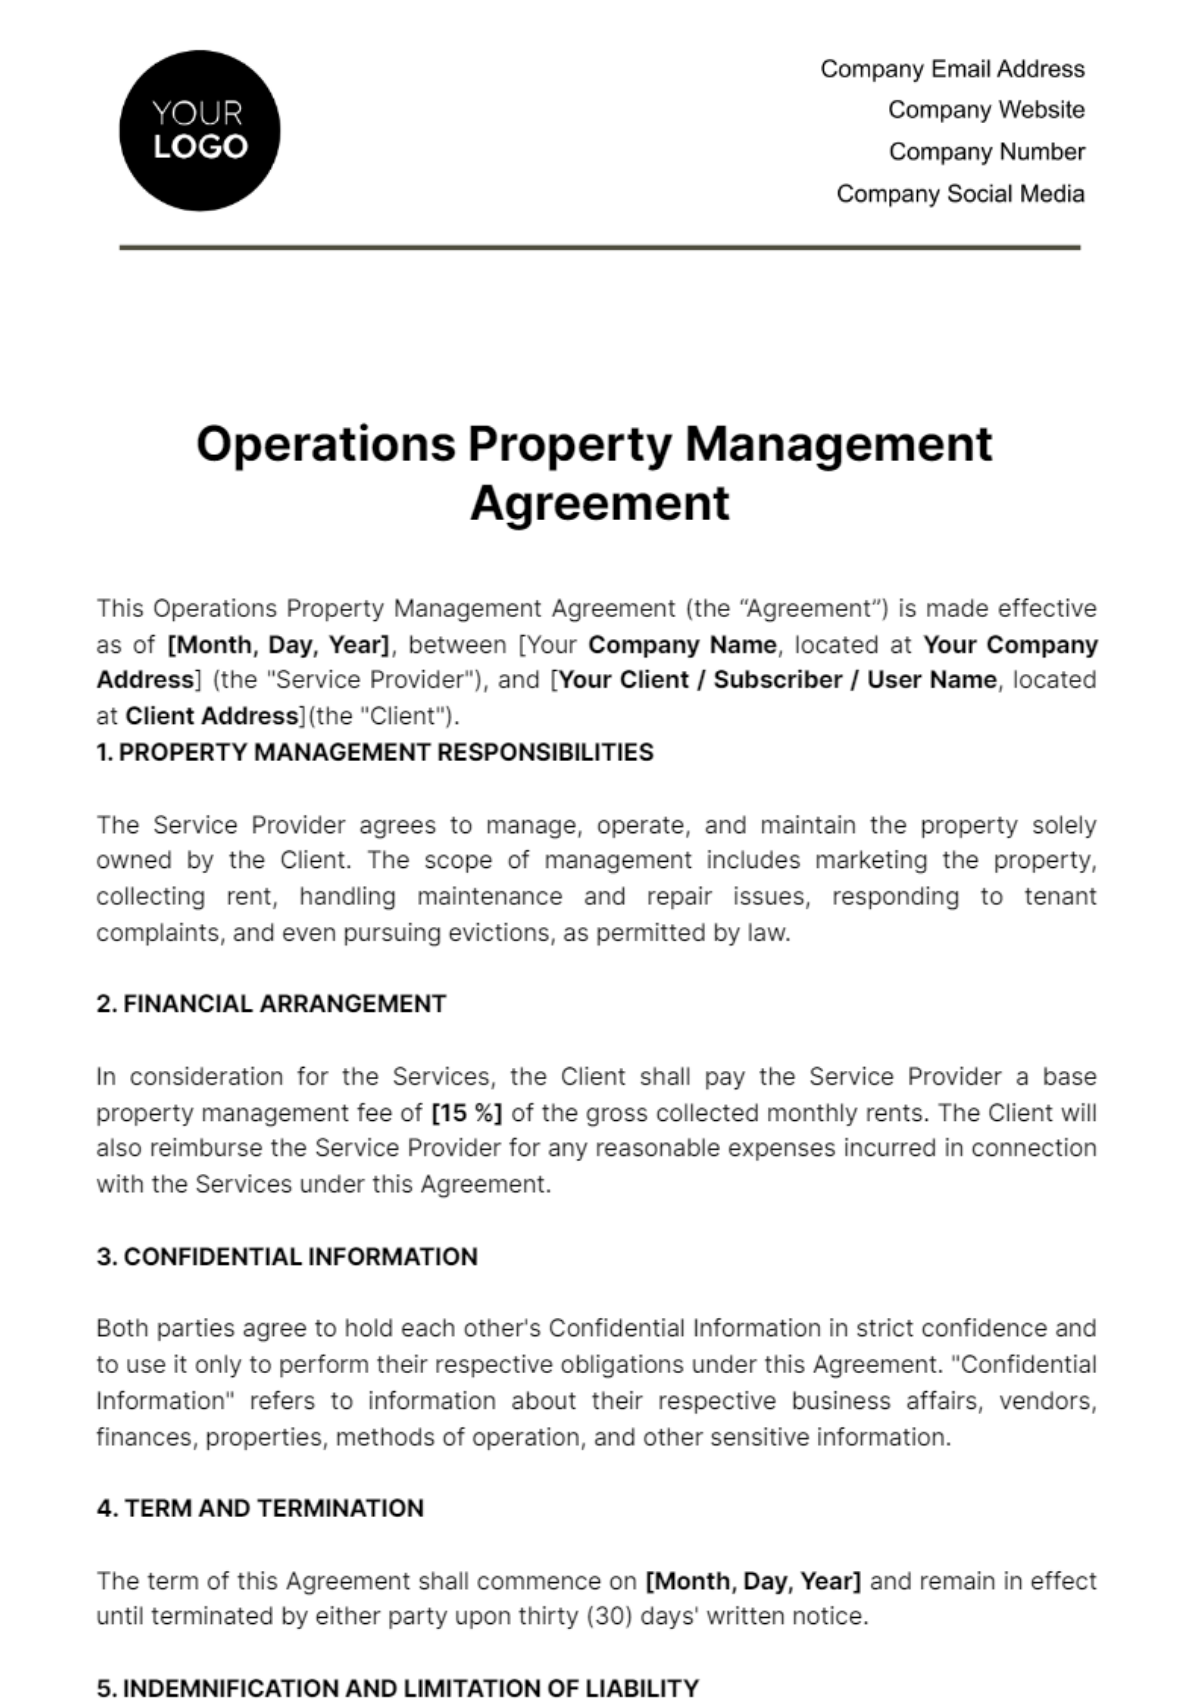 Free Operations Property Management Agreement Template